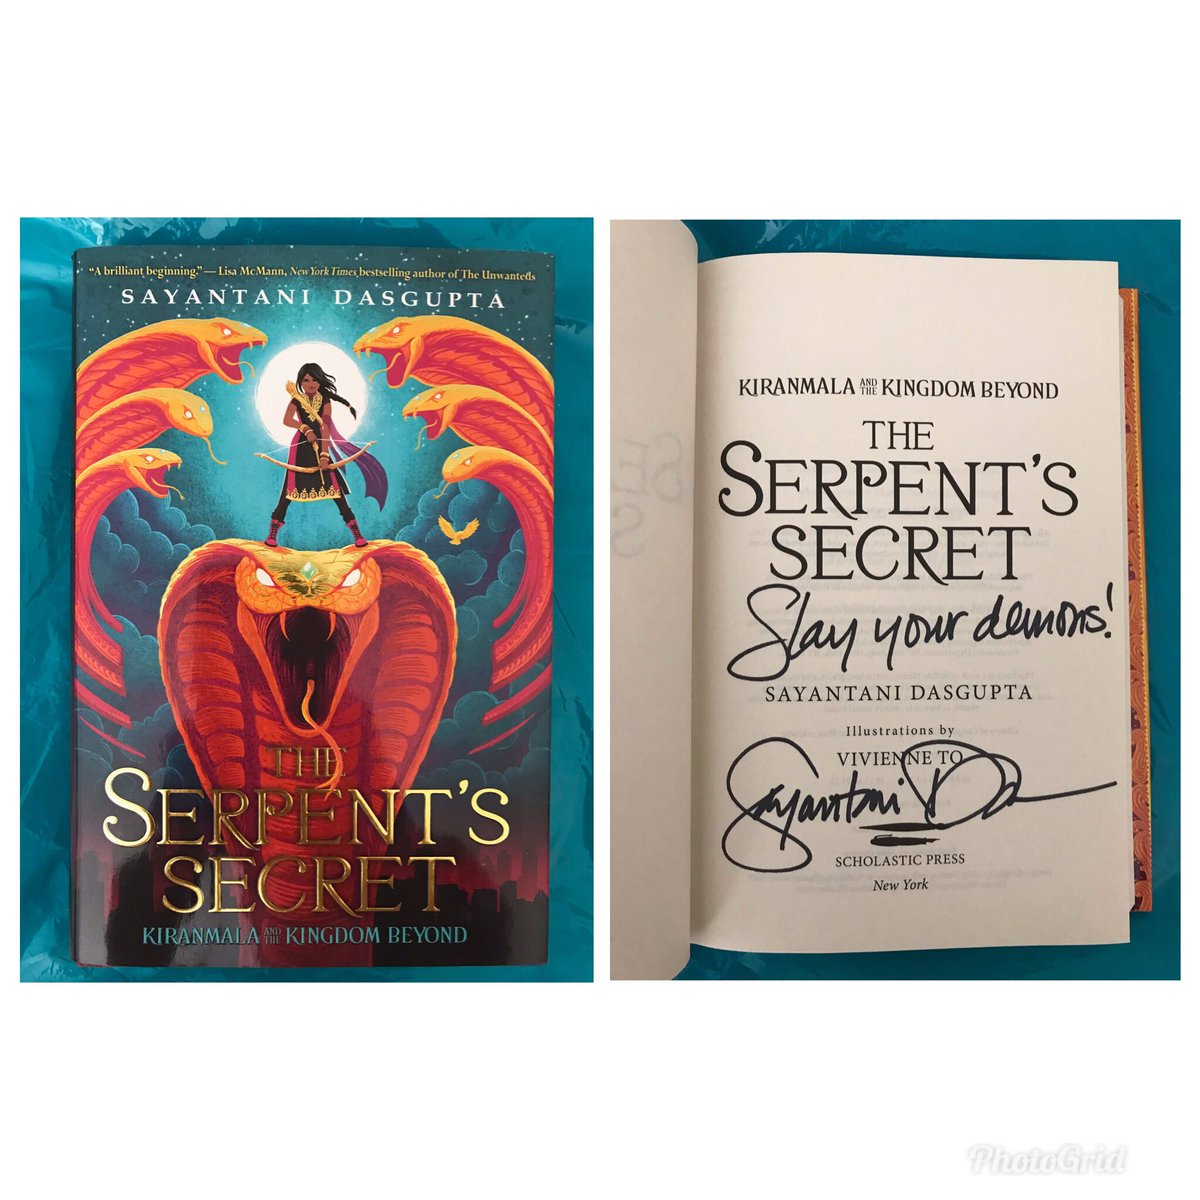 Ready to slay my demons! Latest addition to my signed books collection from @BooksofWonder: The Serpent’s Secret by @Sayantani16 👍 #middlegradereads #amreading #coolbooks